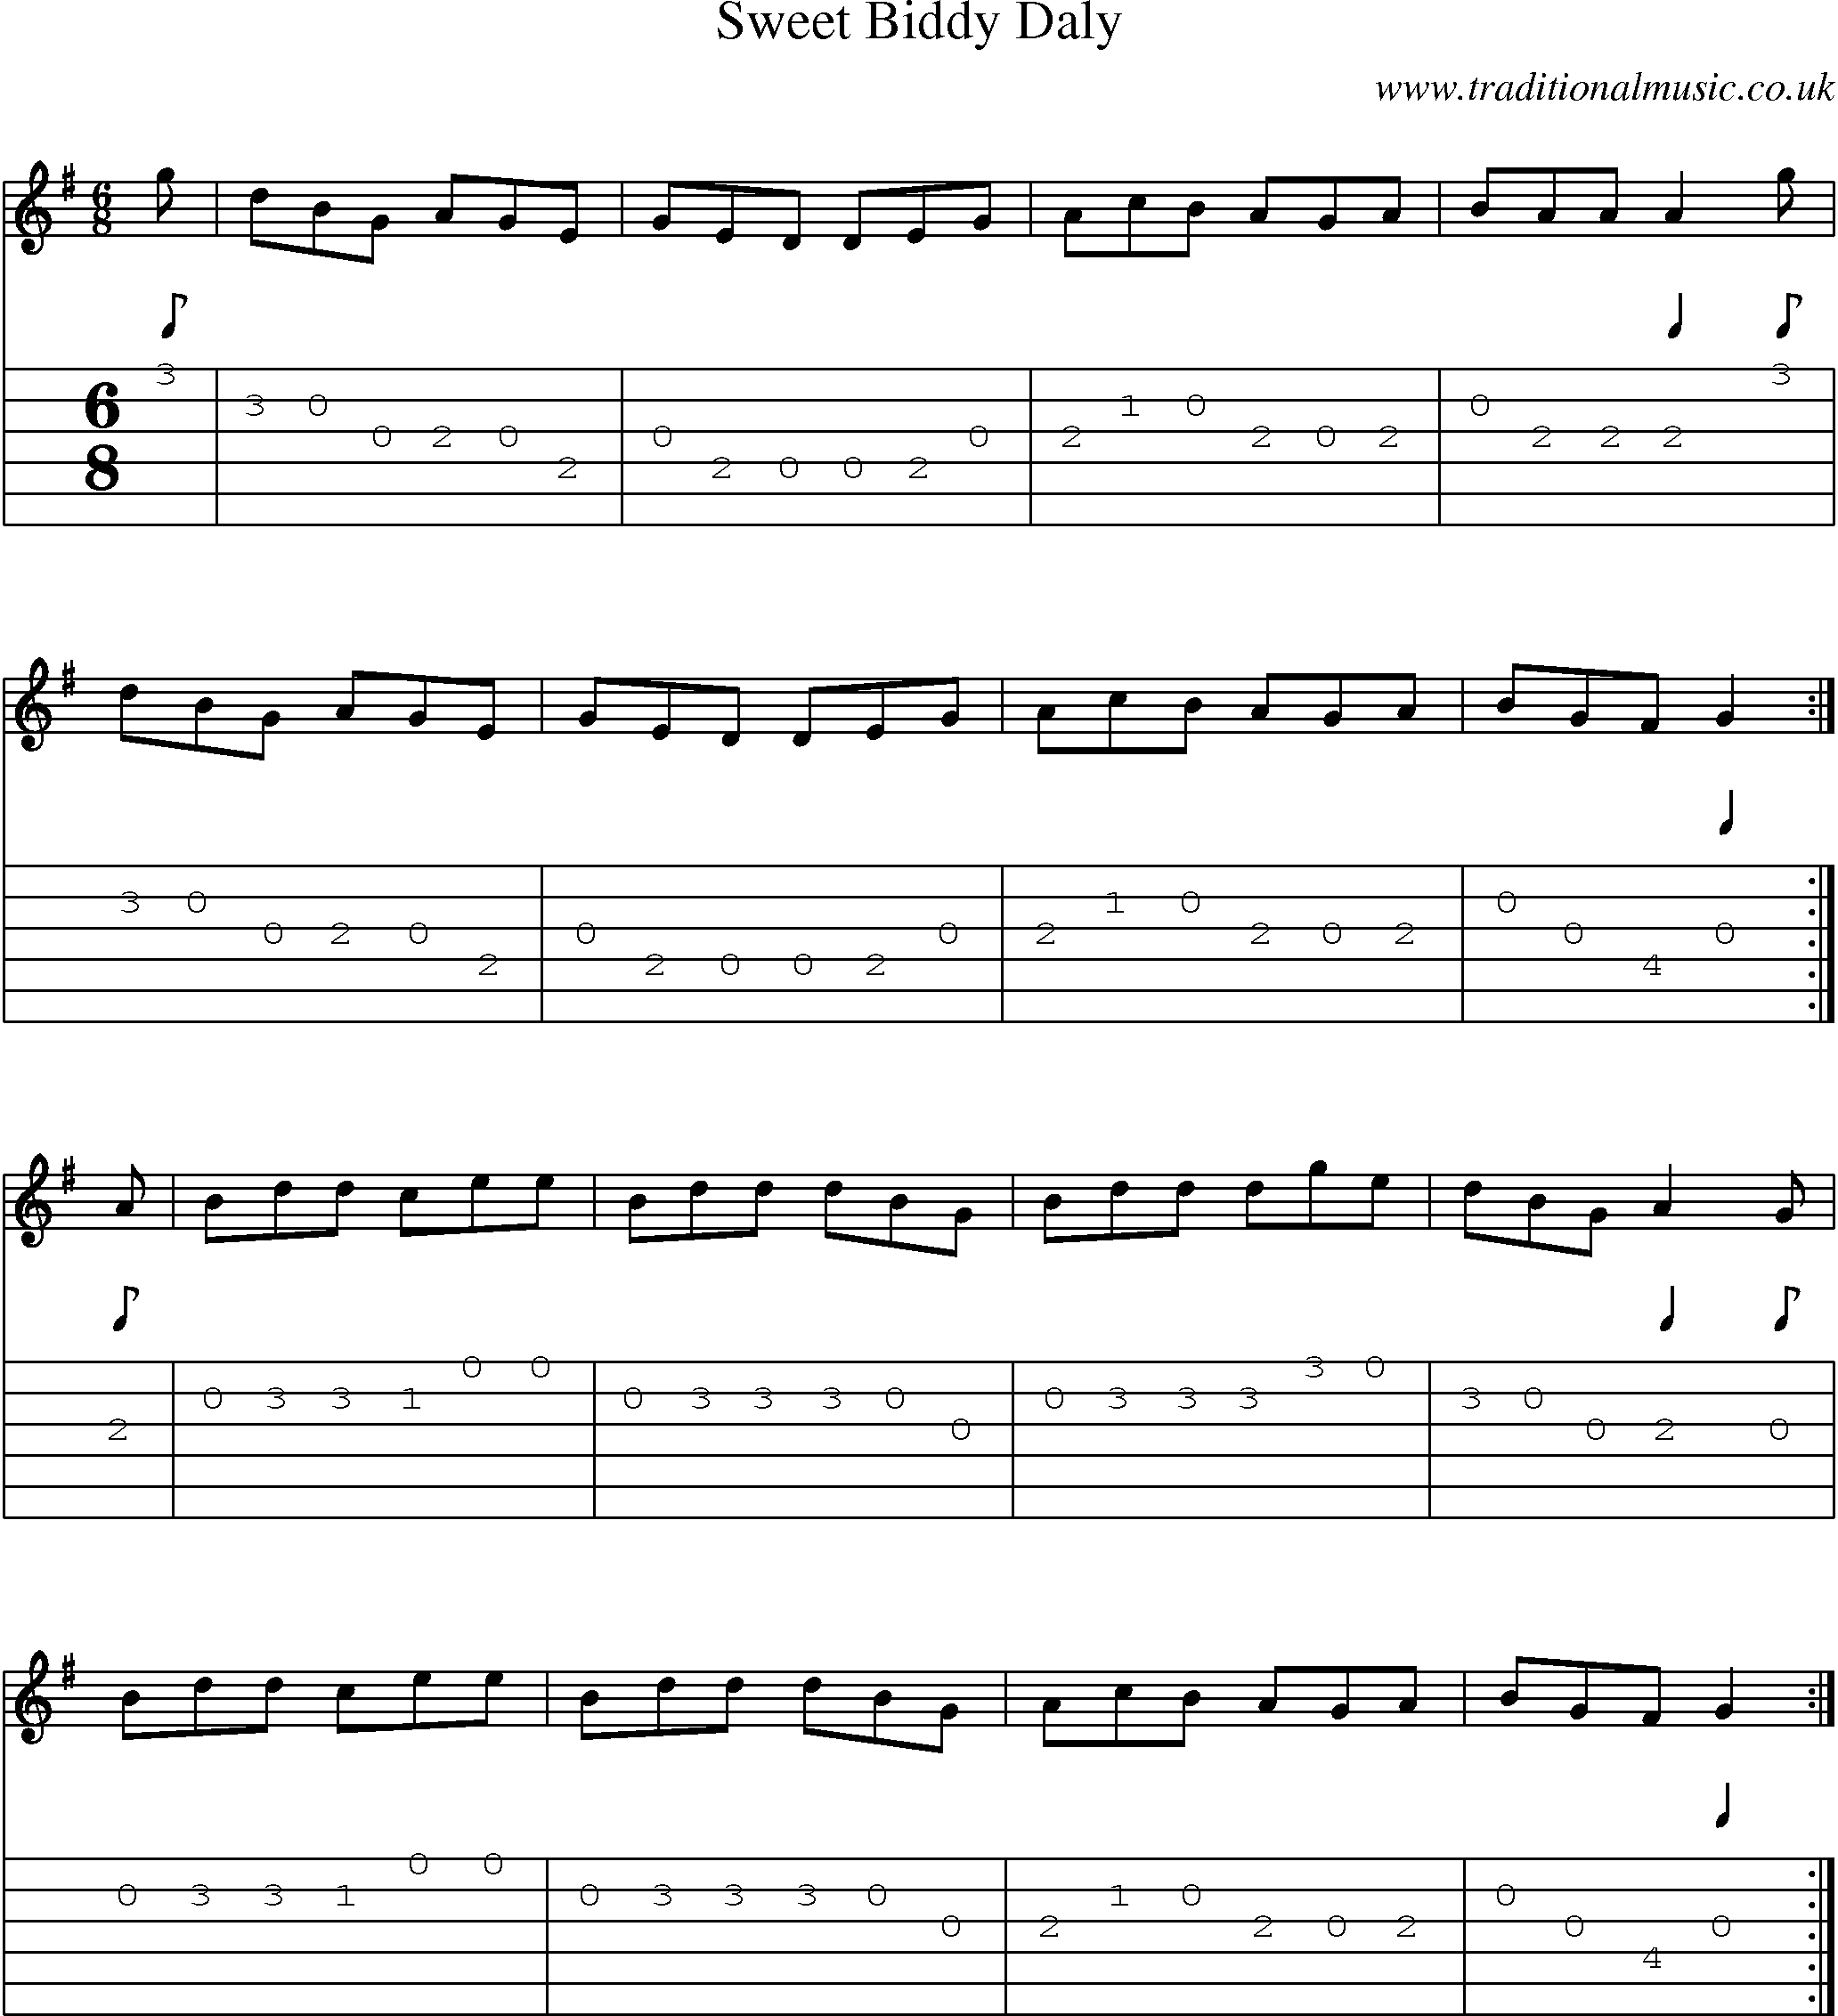 Music Score and Guitar Tabs for Sweet Biddy Daly